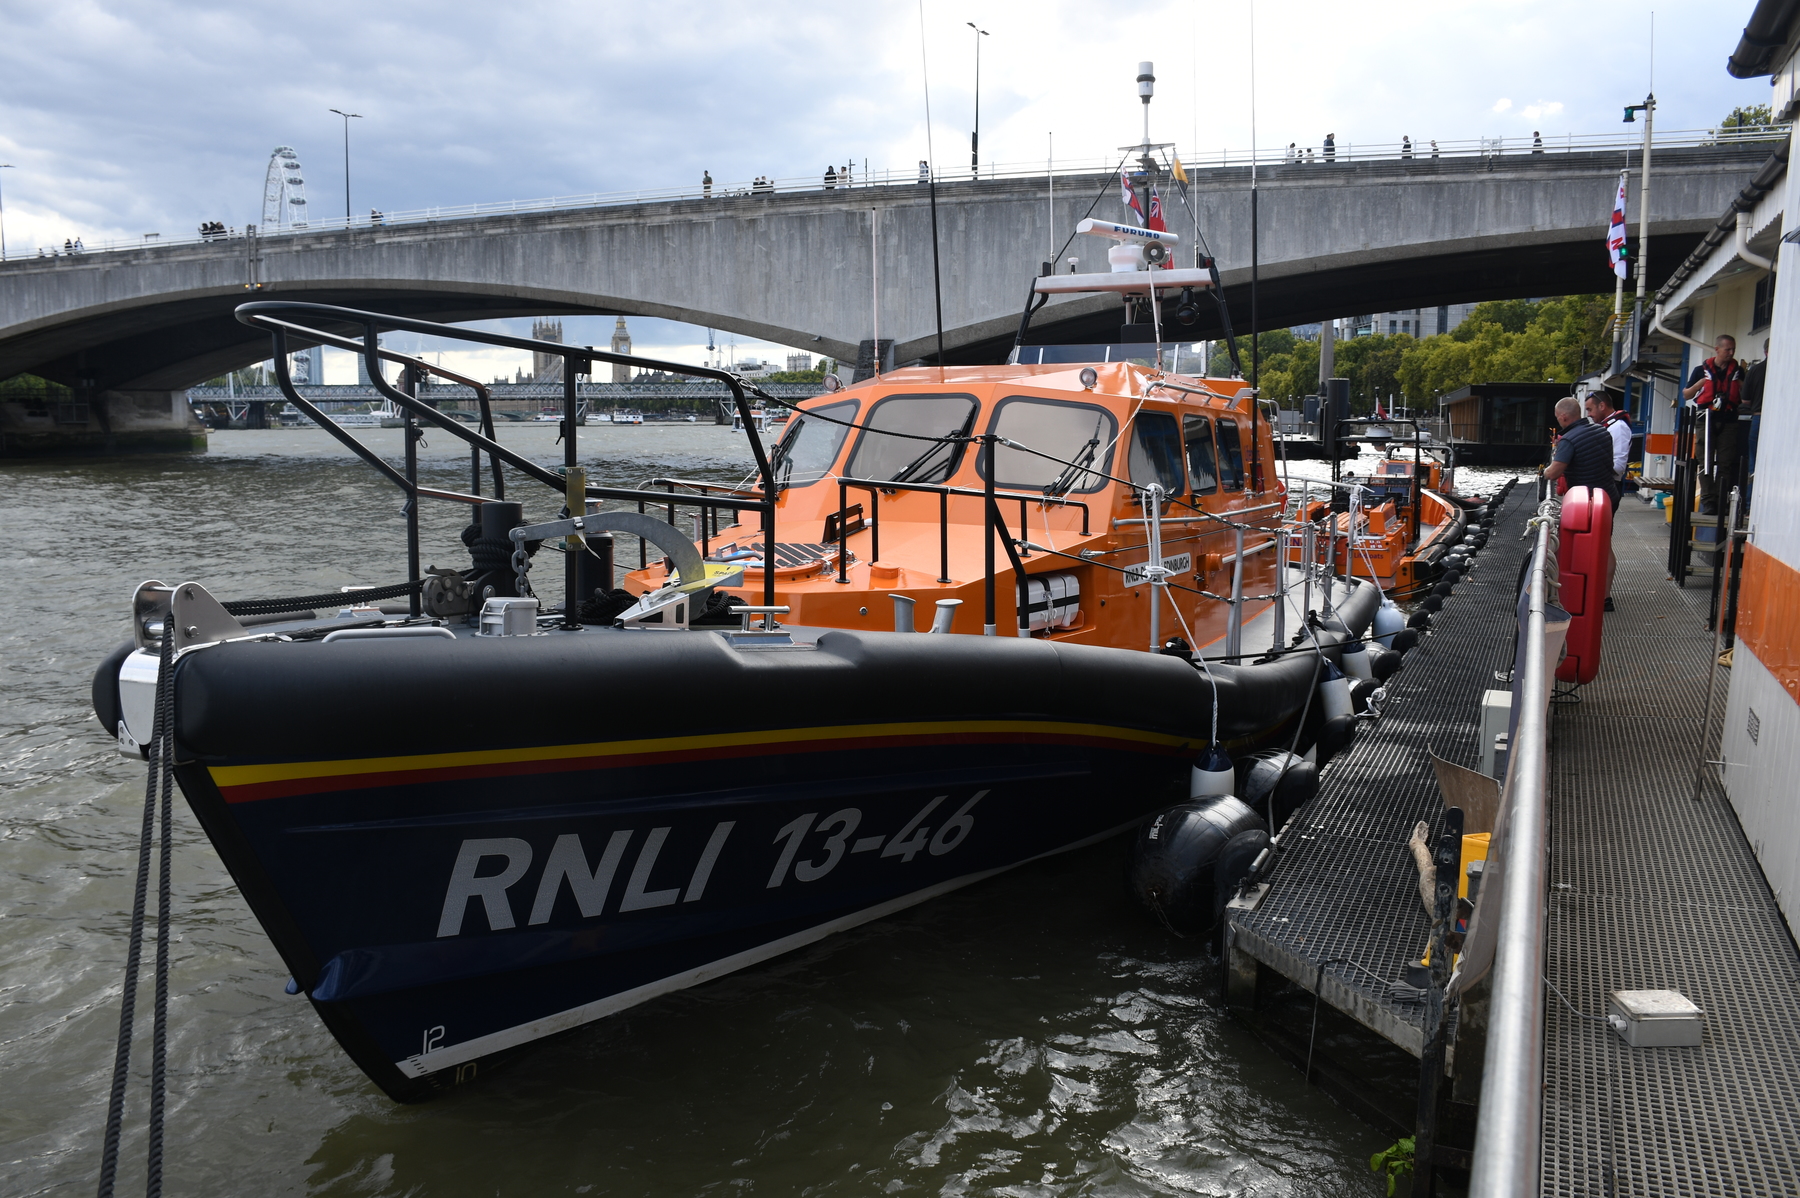 13-46 at Tower lifeboat station on the Thames waiting for the Reflections parade